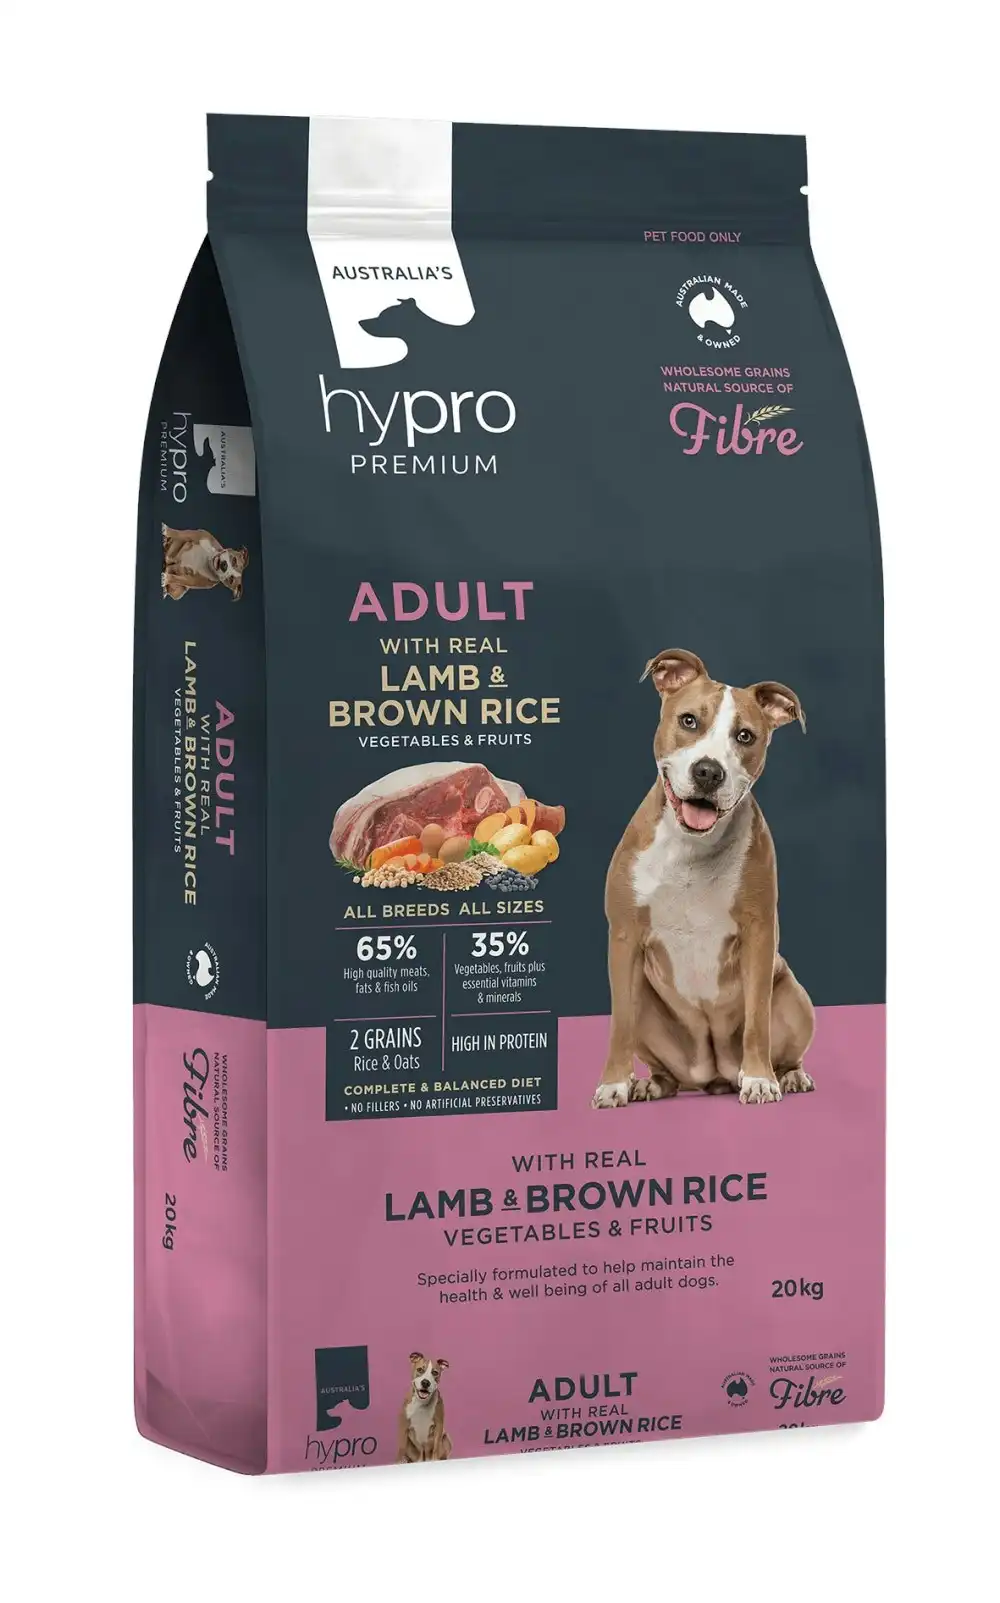 Hypro Premium Wholesome Grains Lamb & Brown Rice Dry Dog Food 20kg